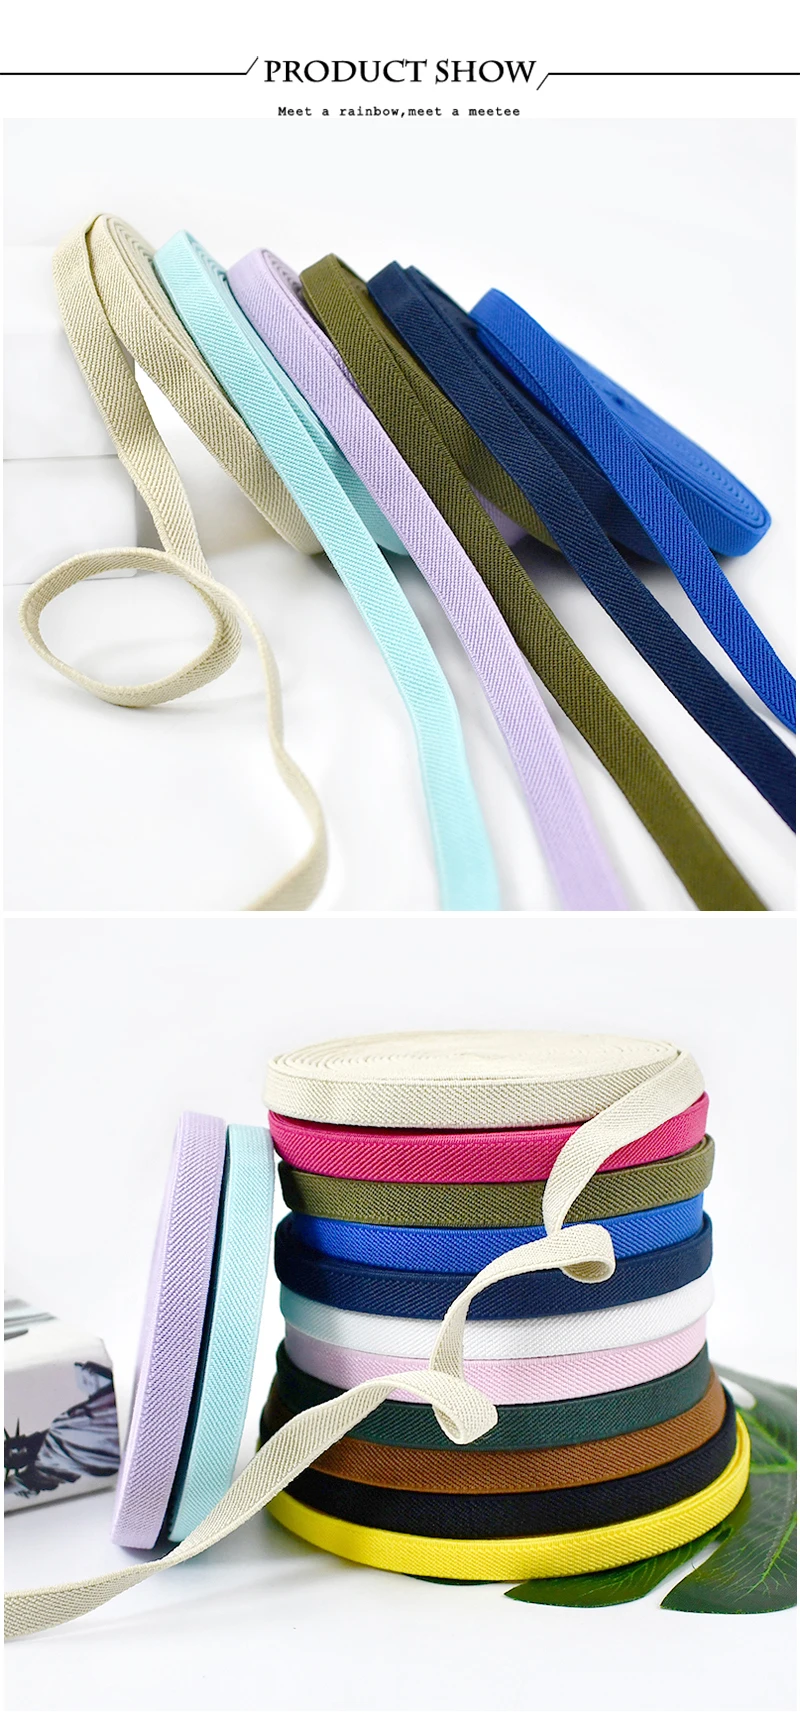 Meetee 5/10M 10mm 3/8'' Polyester Elastic Band Soft Bia Strap Belt Rubber  Bands Rope DIY Flat Binding Spring Webbing Tape